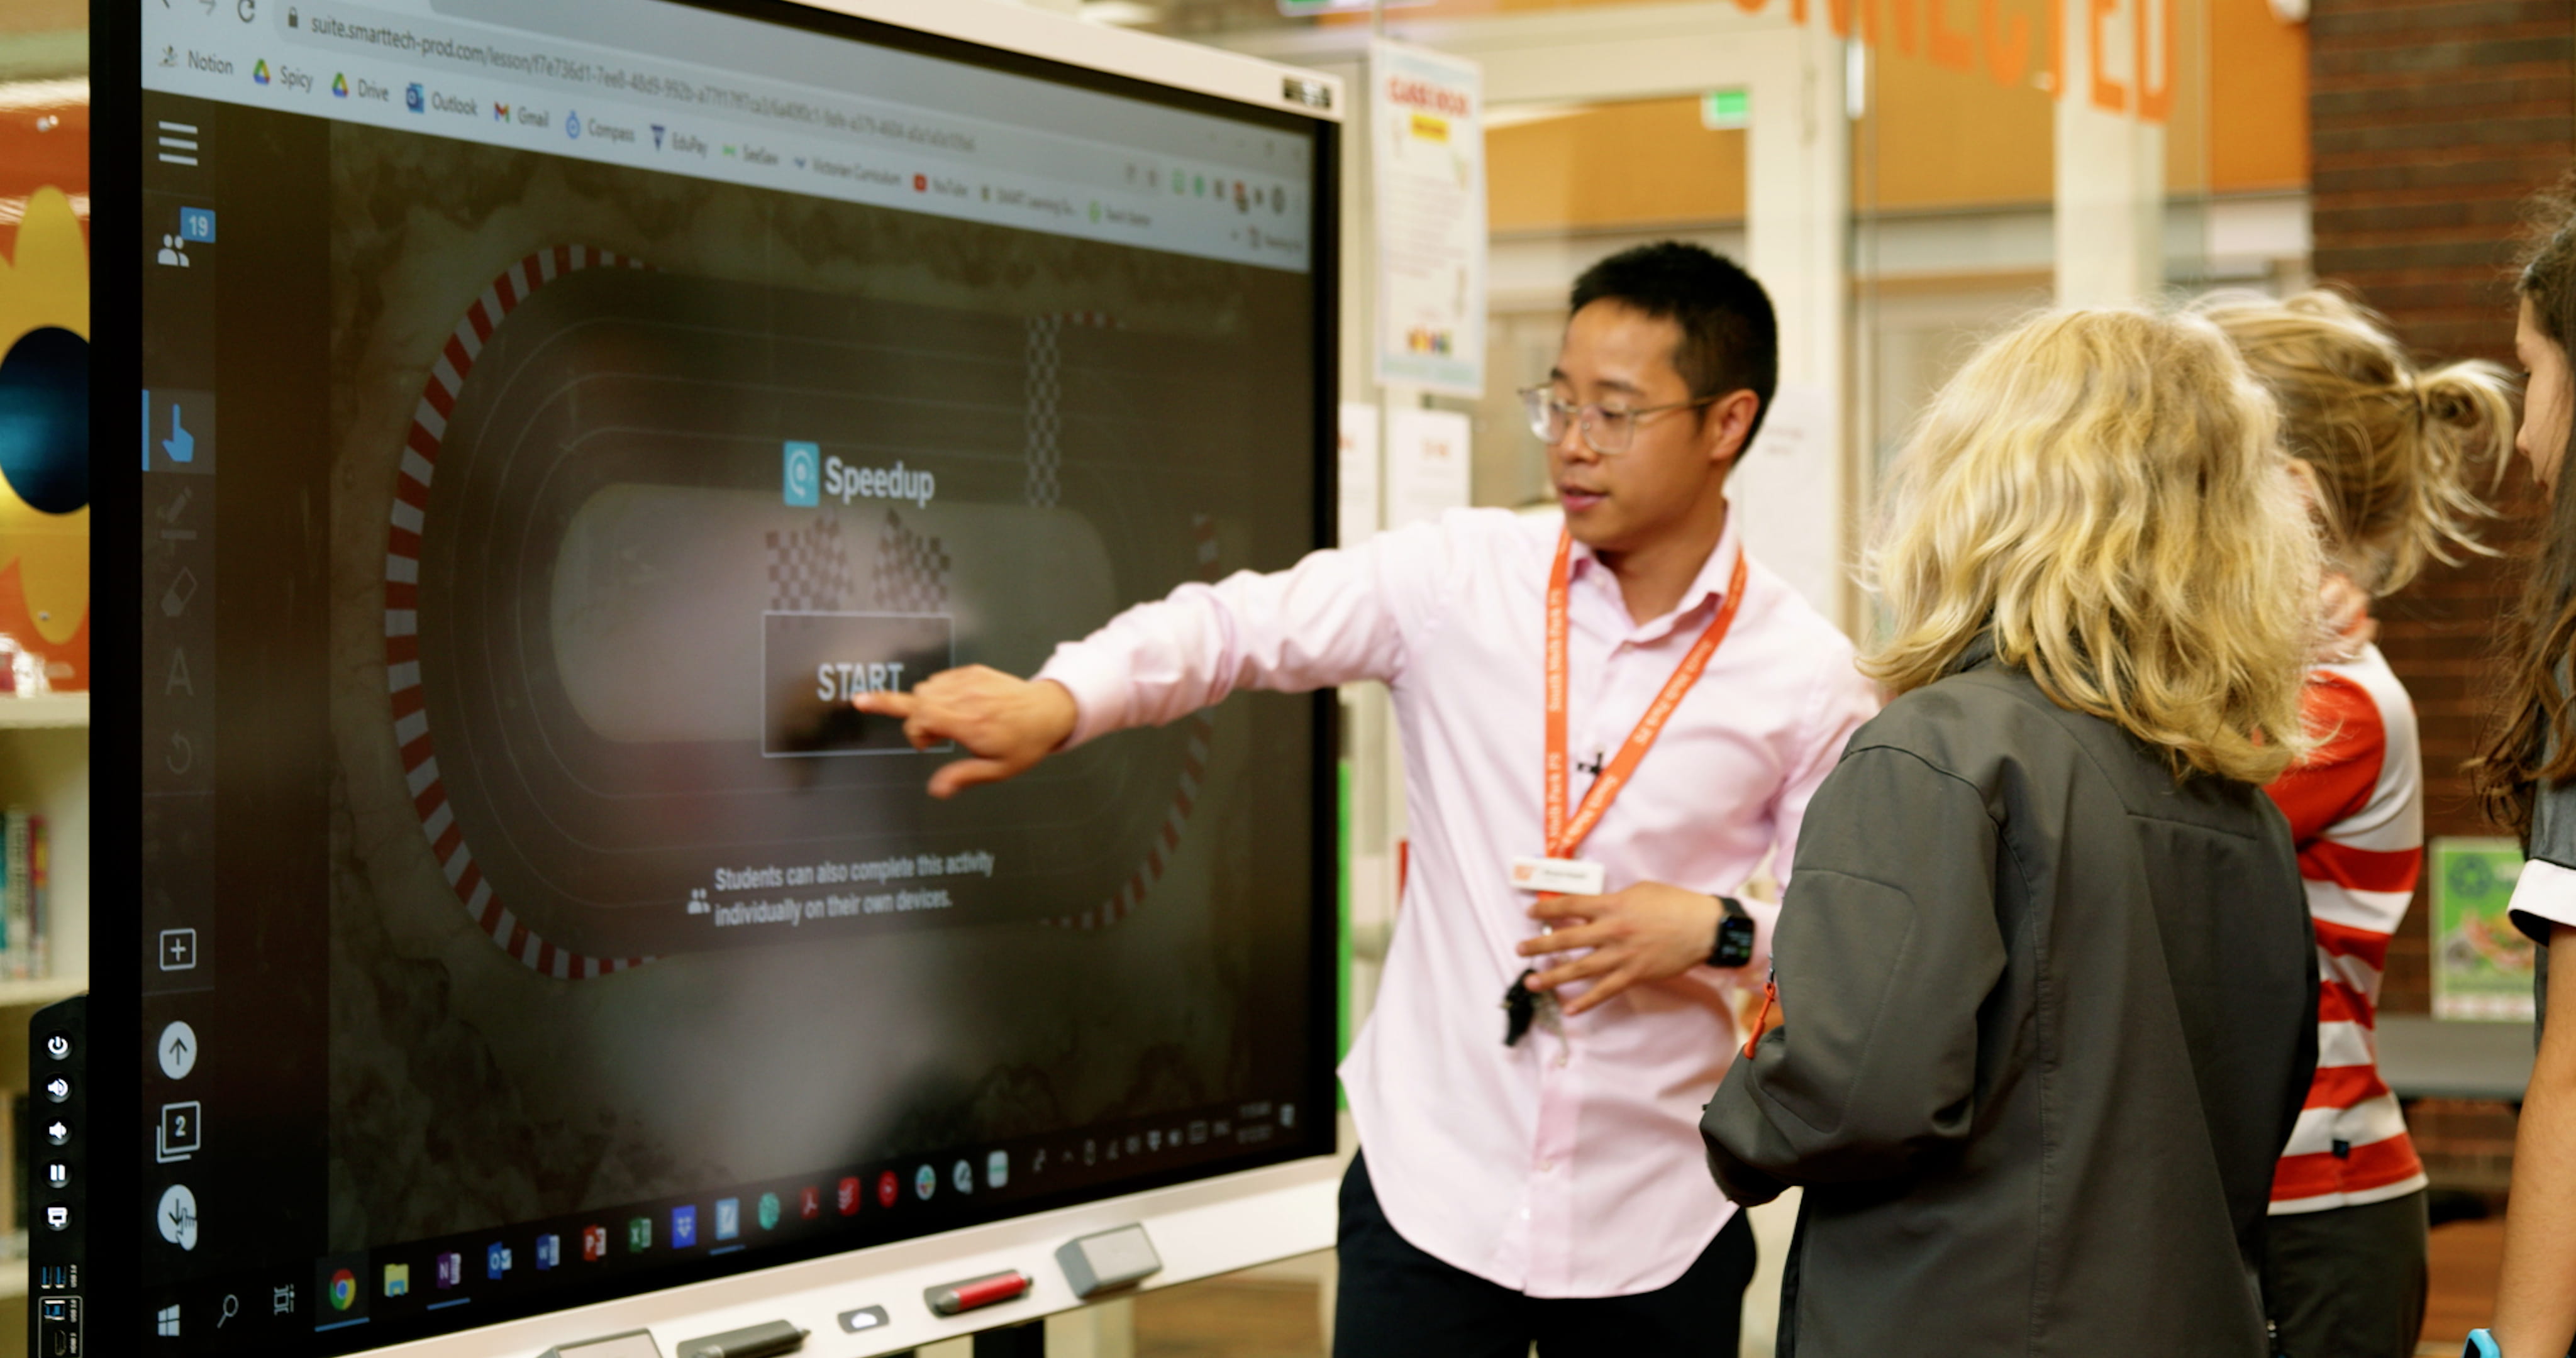 Students watch a teacher demonstrate the assignment during a lesson at the SMART Board.